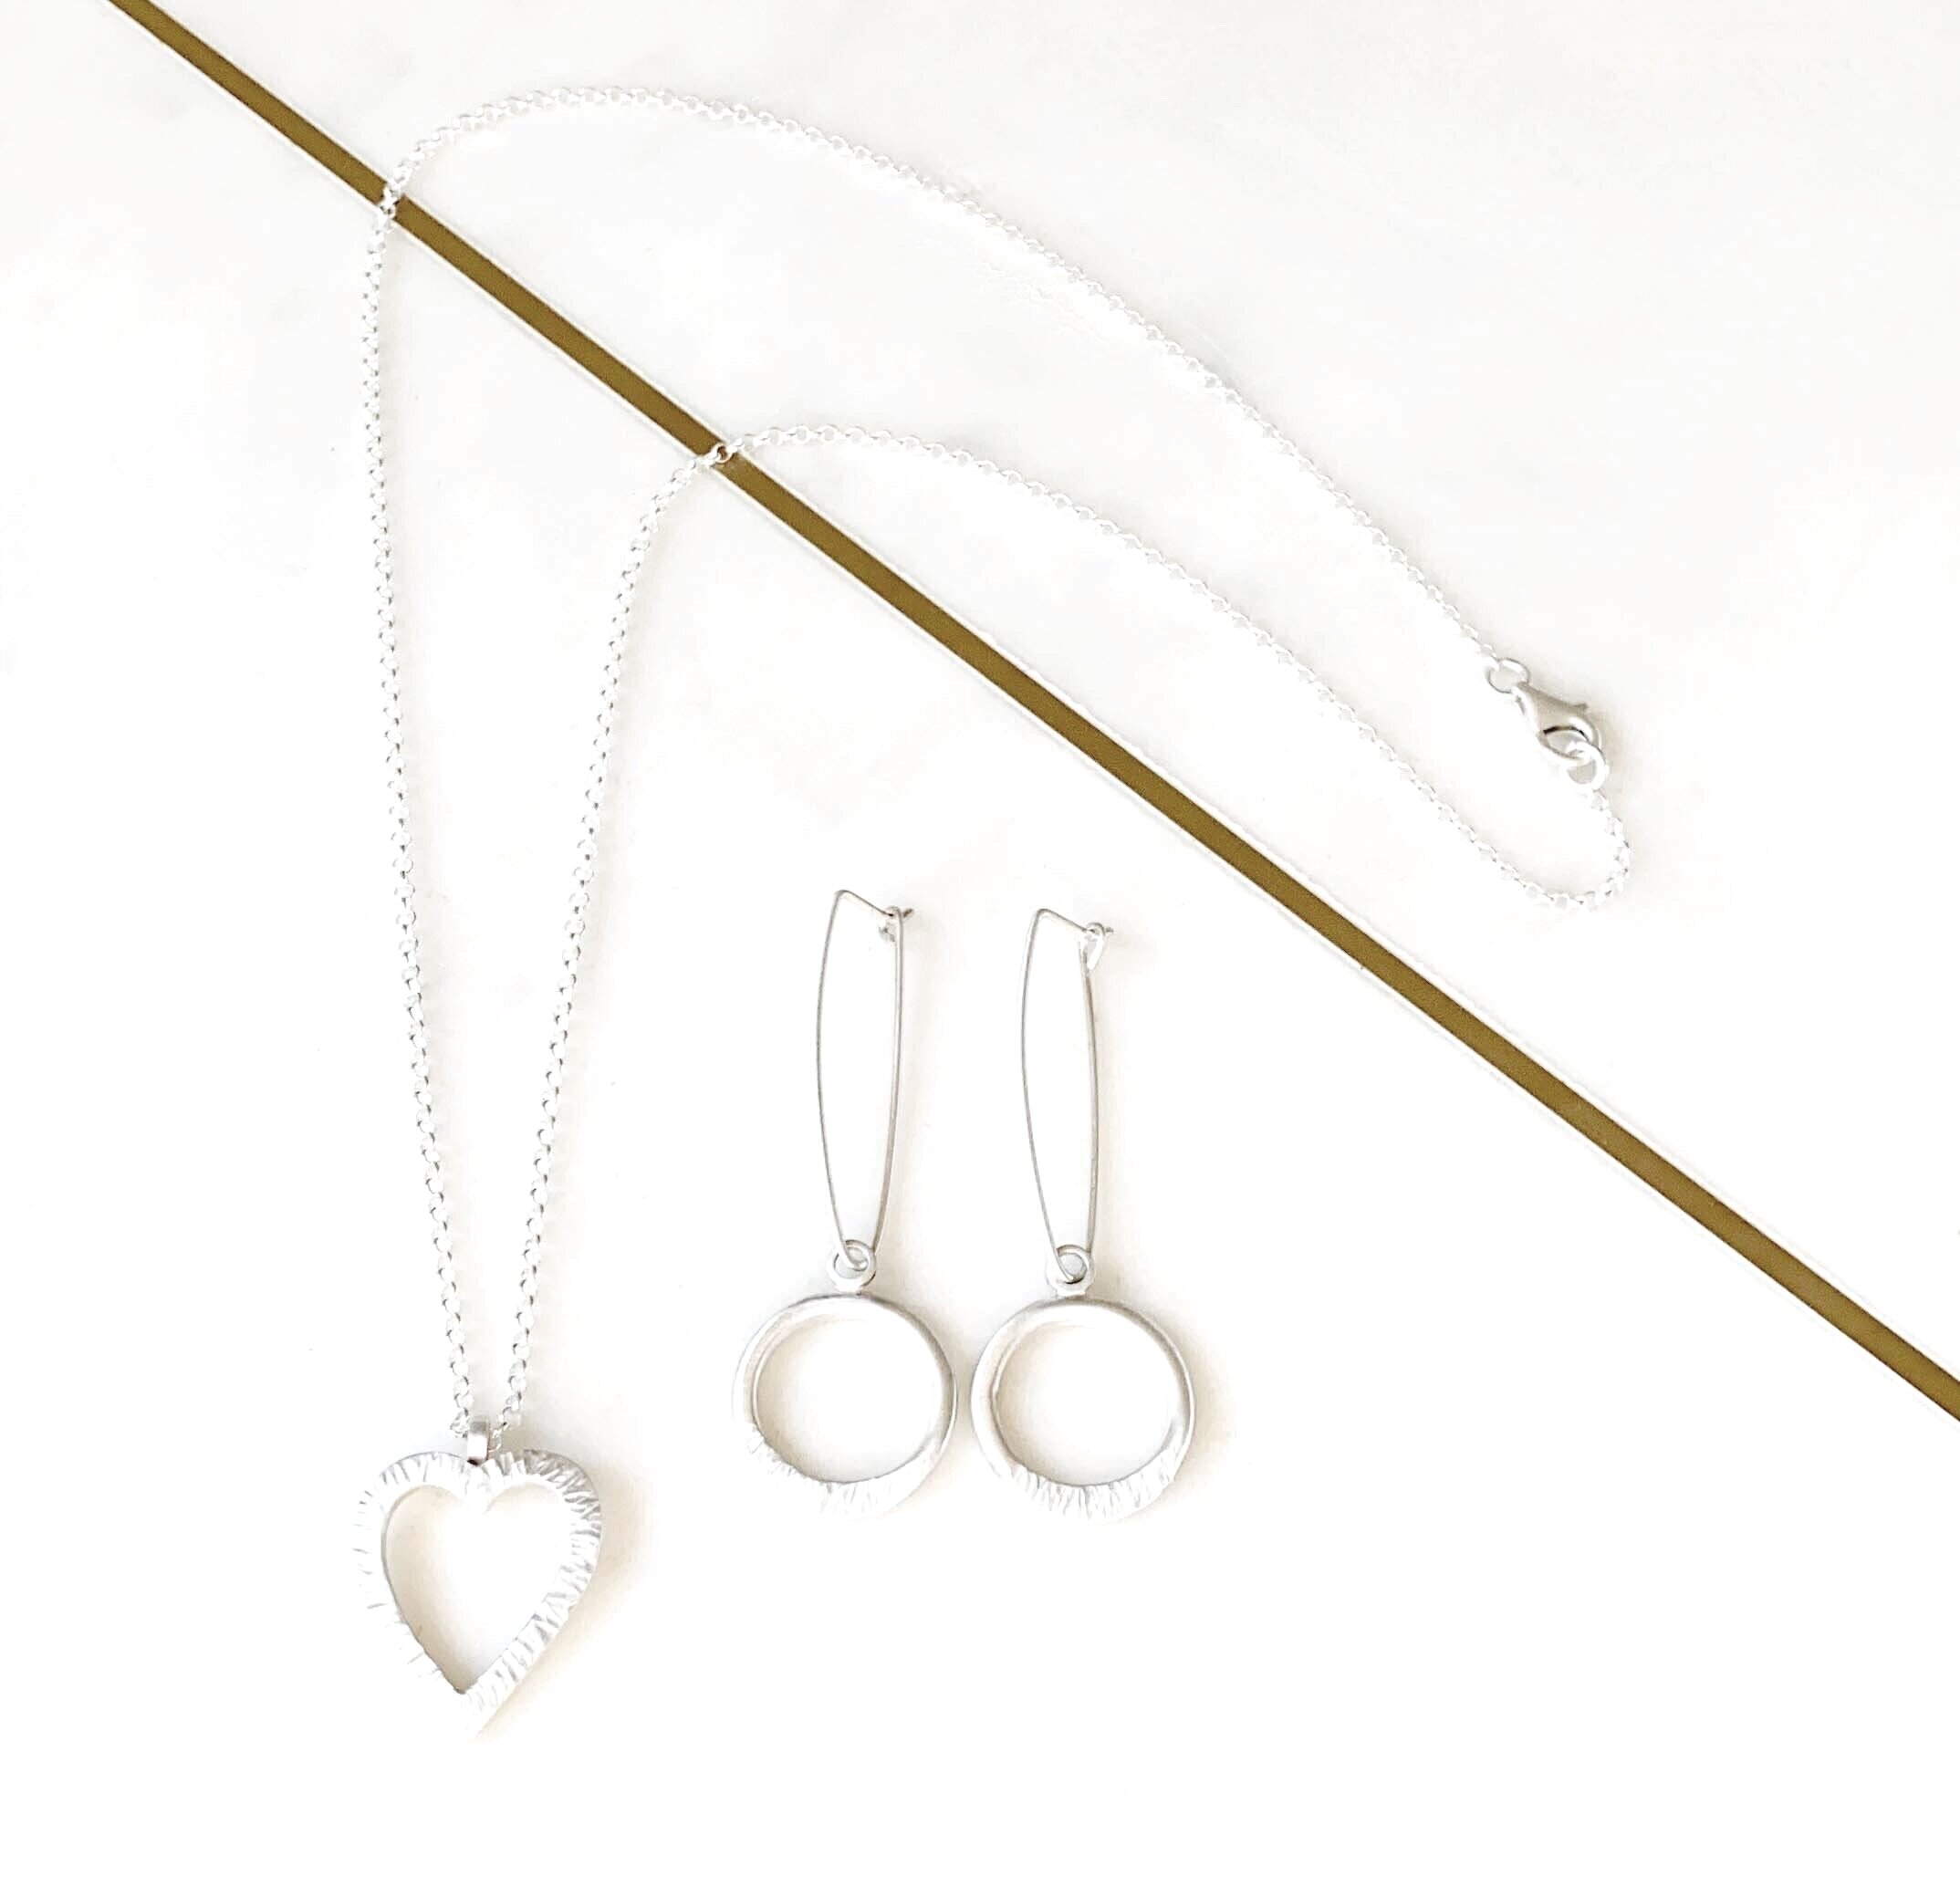 Sterling Silver "Modern Nature" Circle Drop Earrings and Heart Chain Necklace